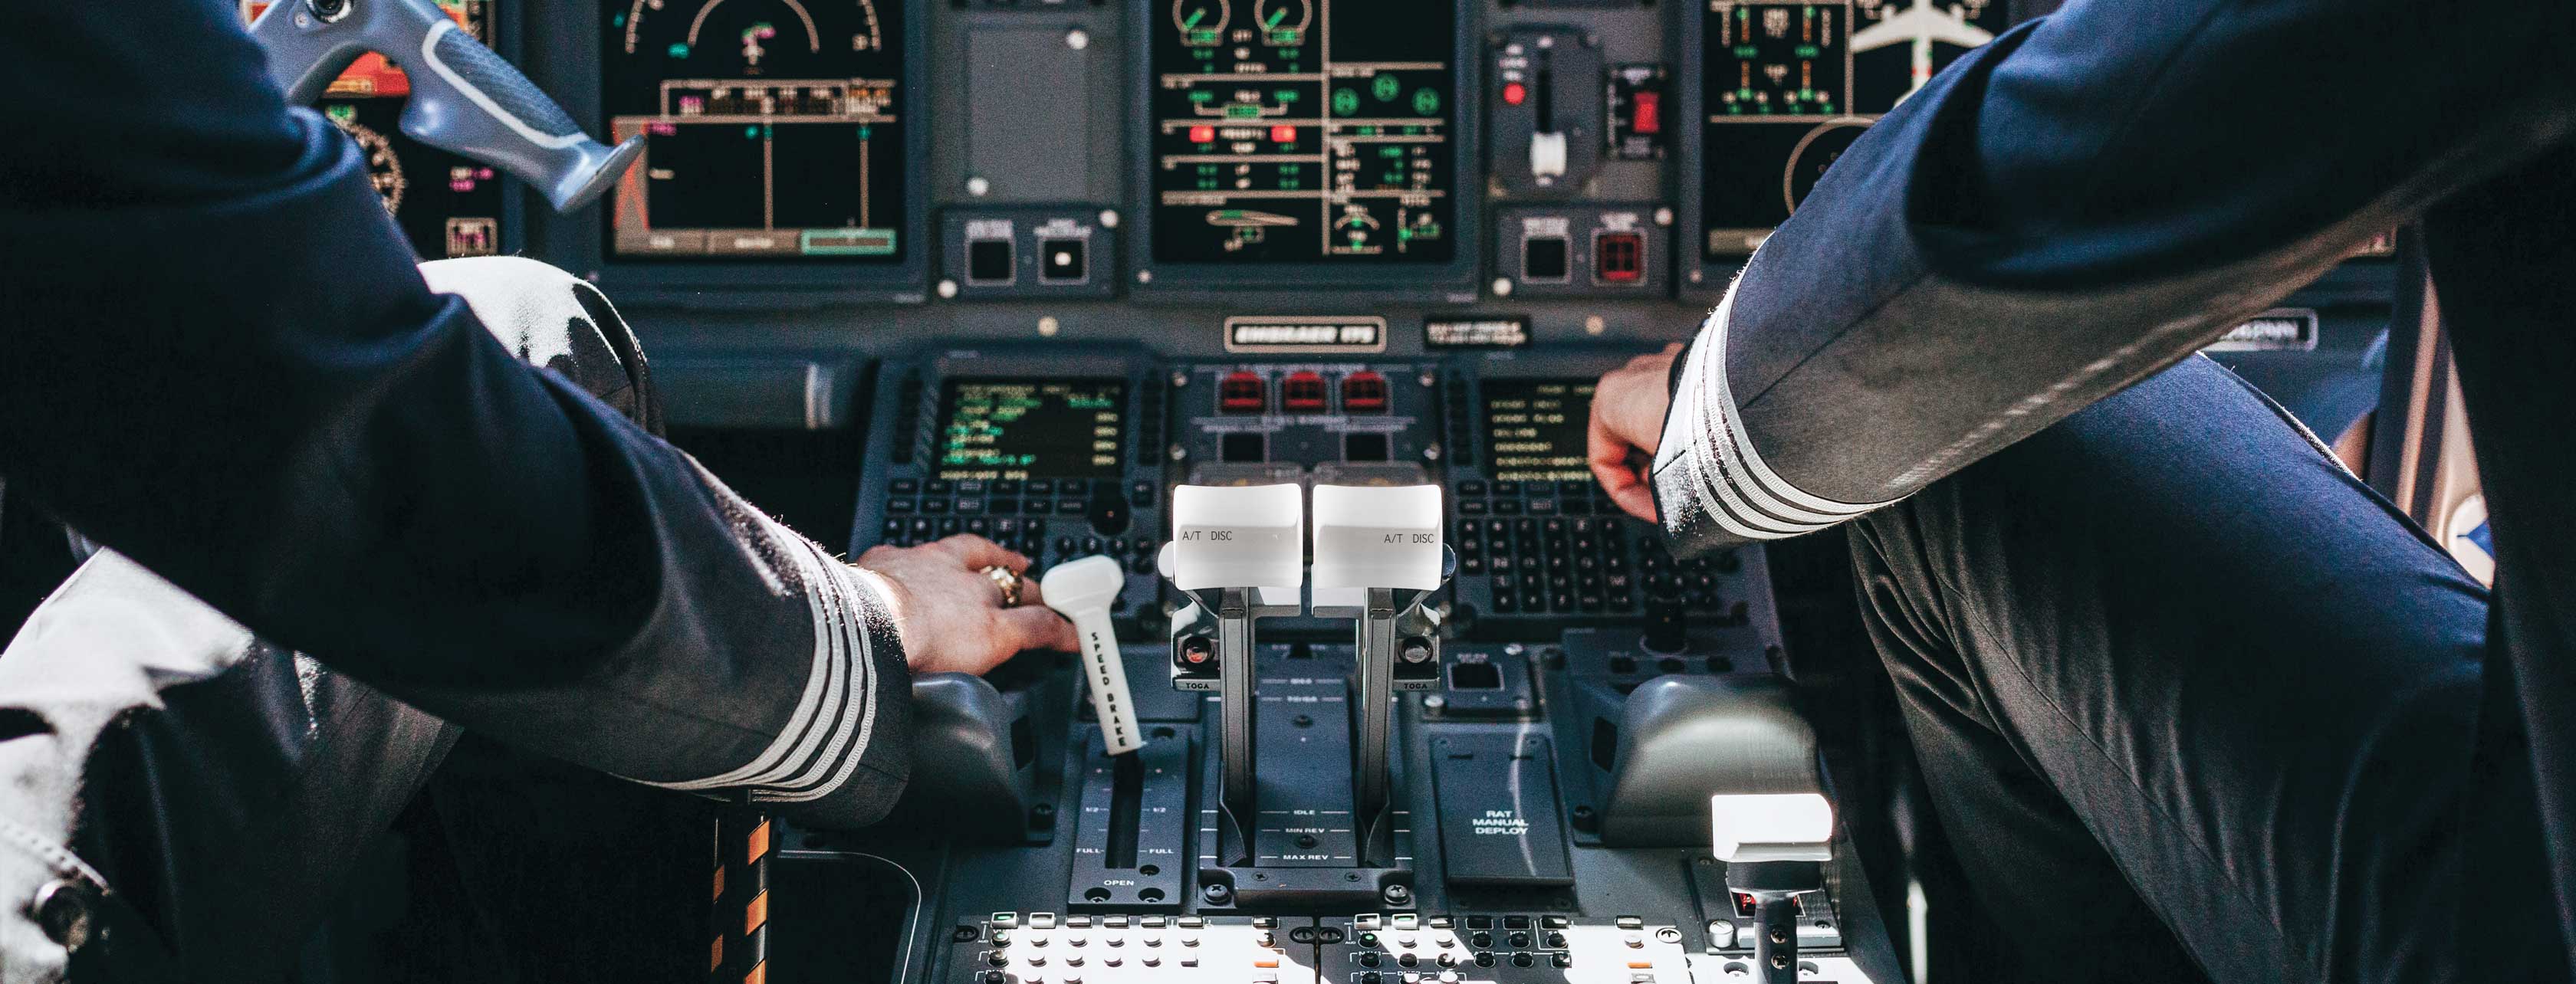 How Much Do Commercial Pilots Make a Hour